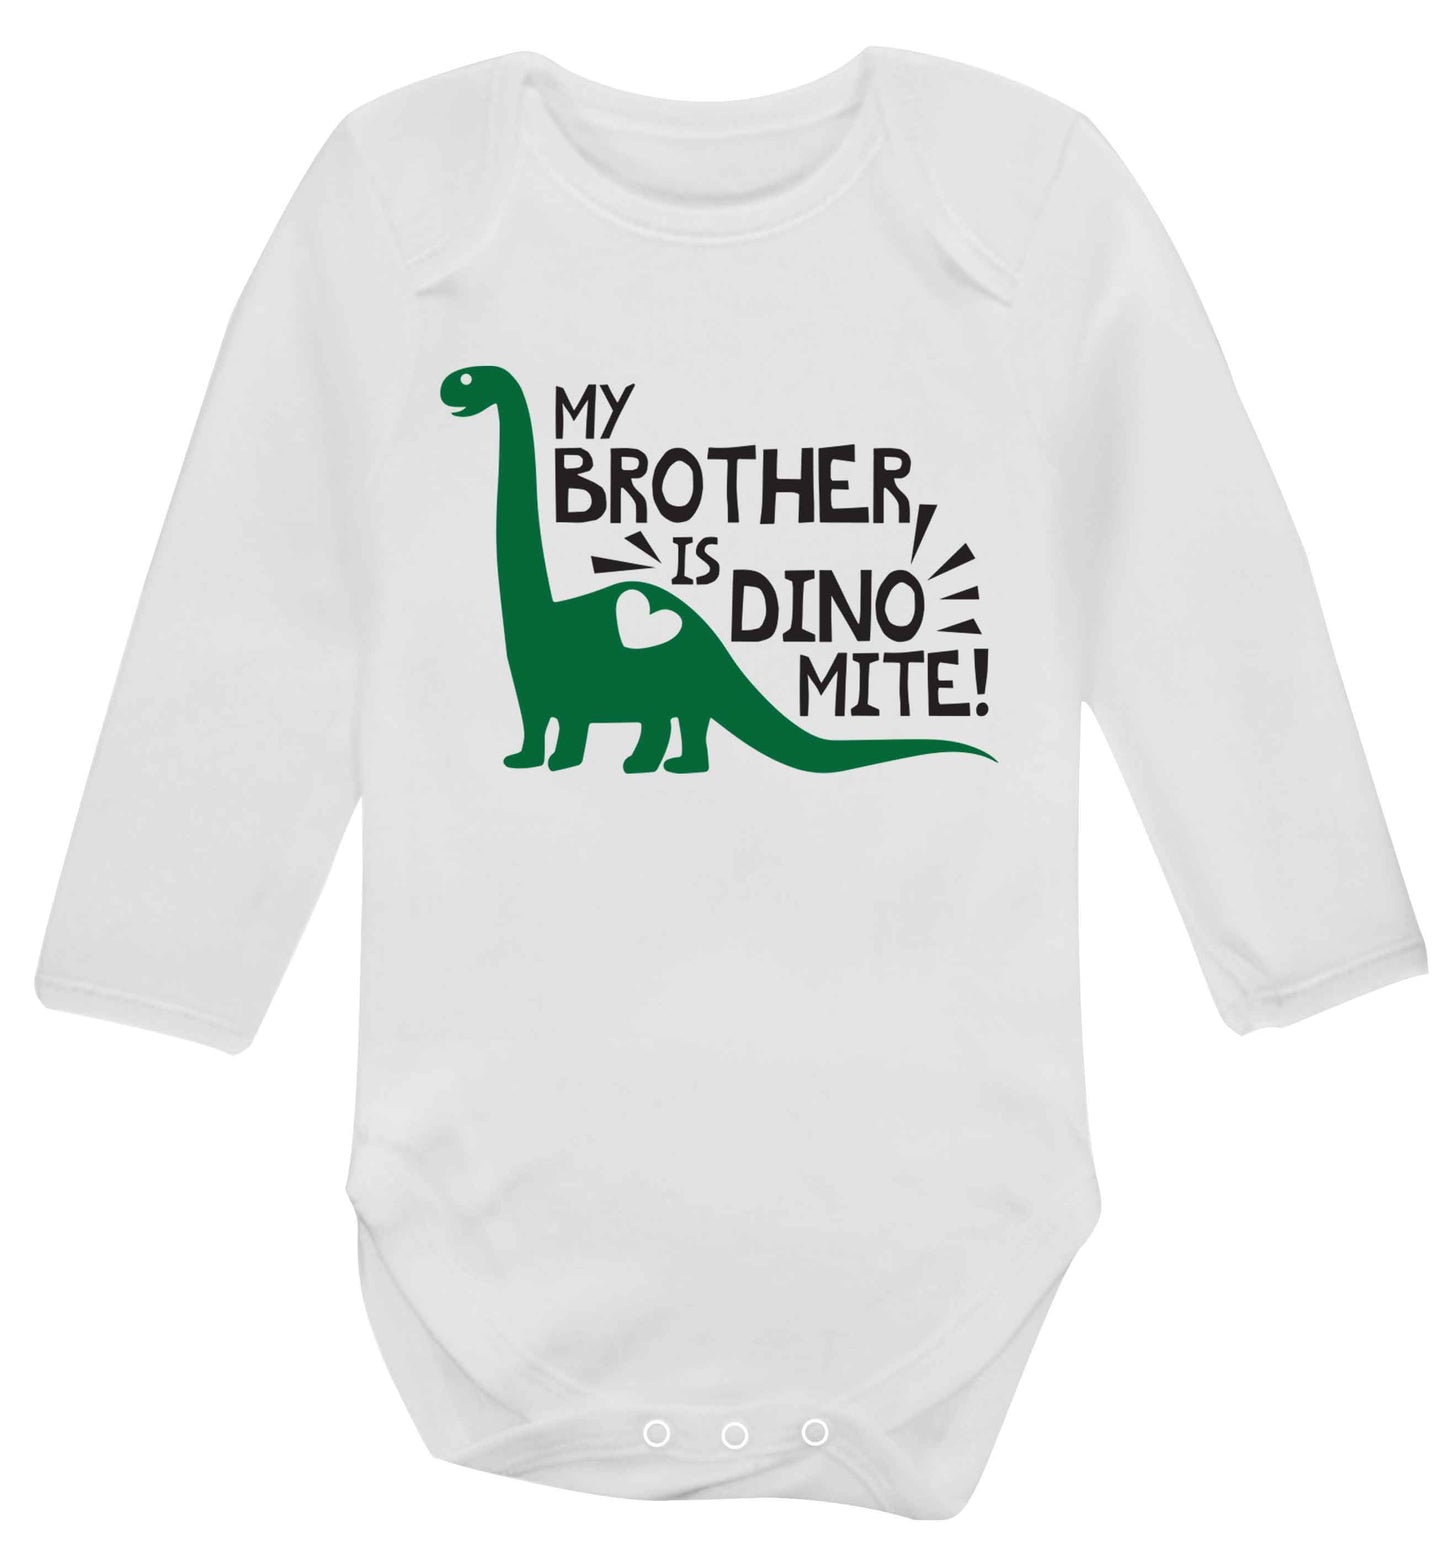 My brother is dinomite! Baby Vest long sleeved white 6-12 months